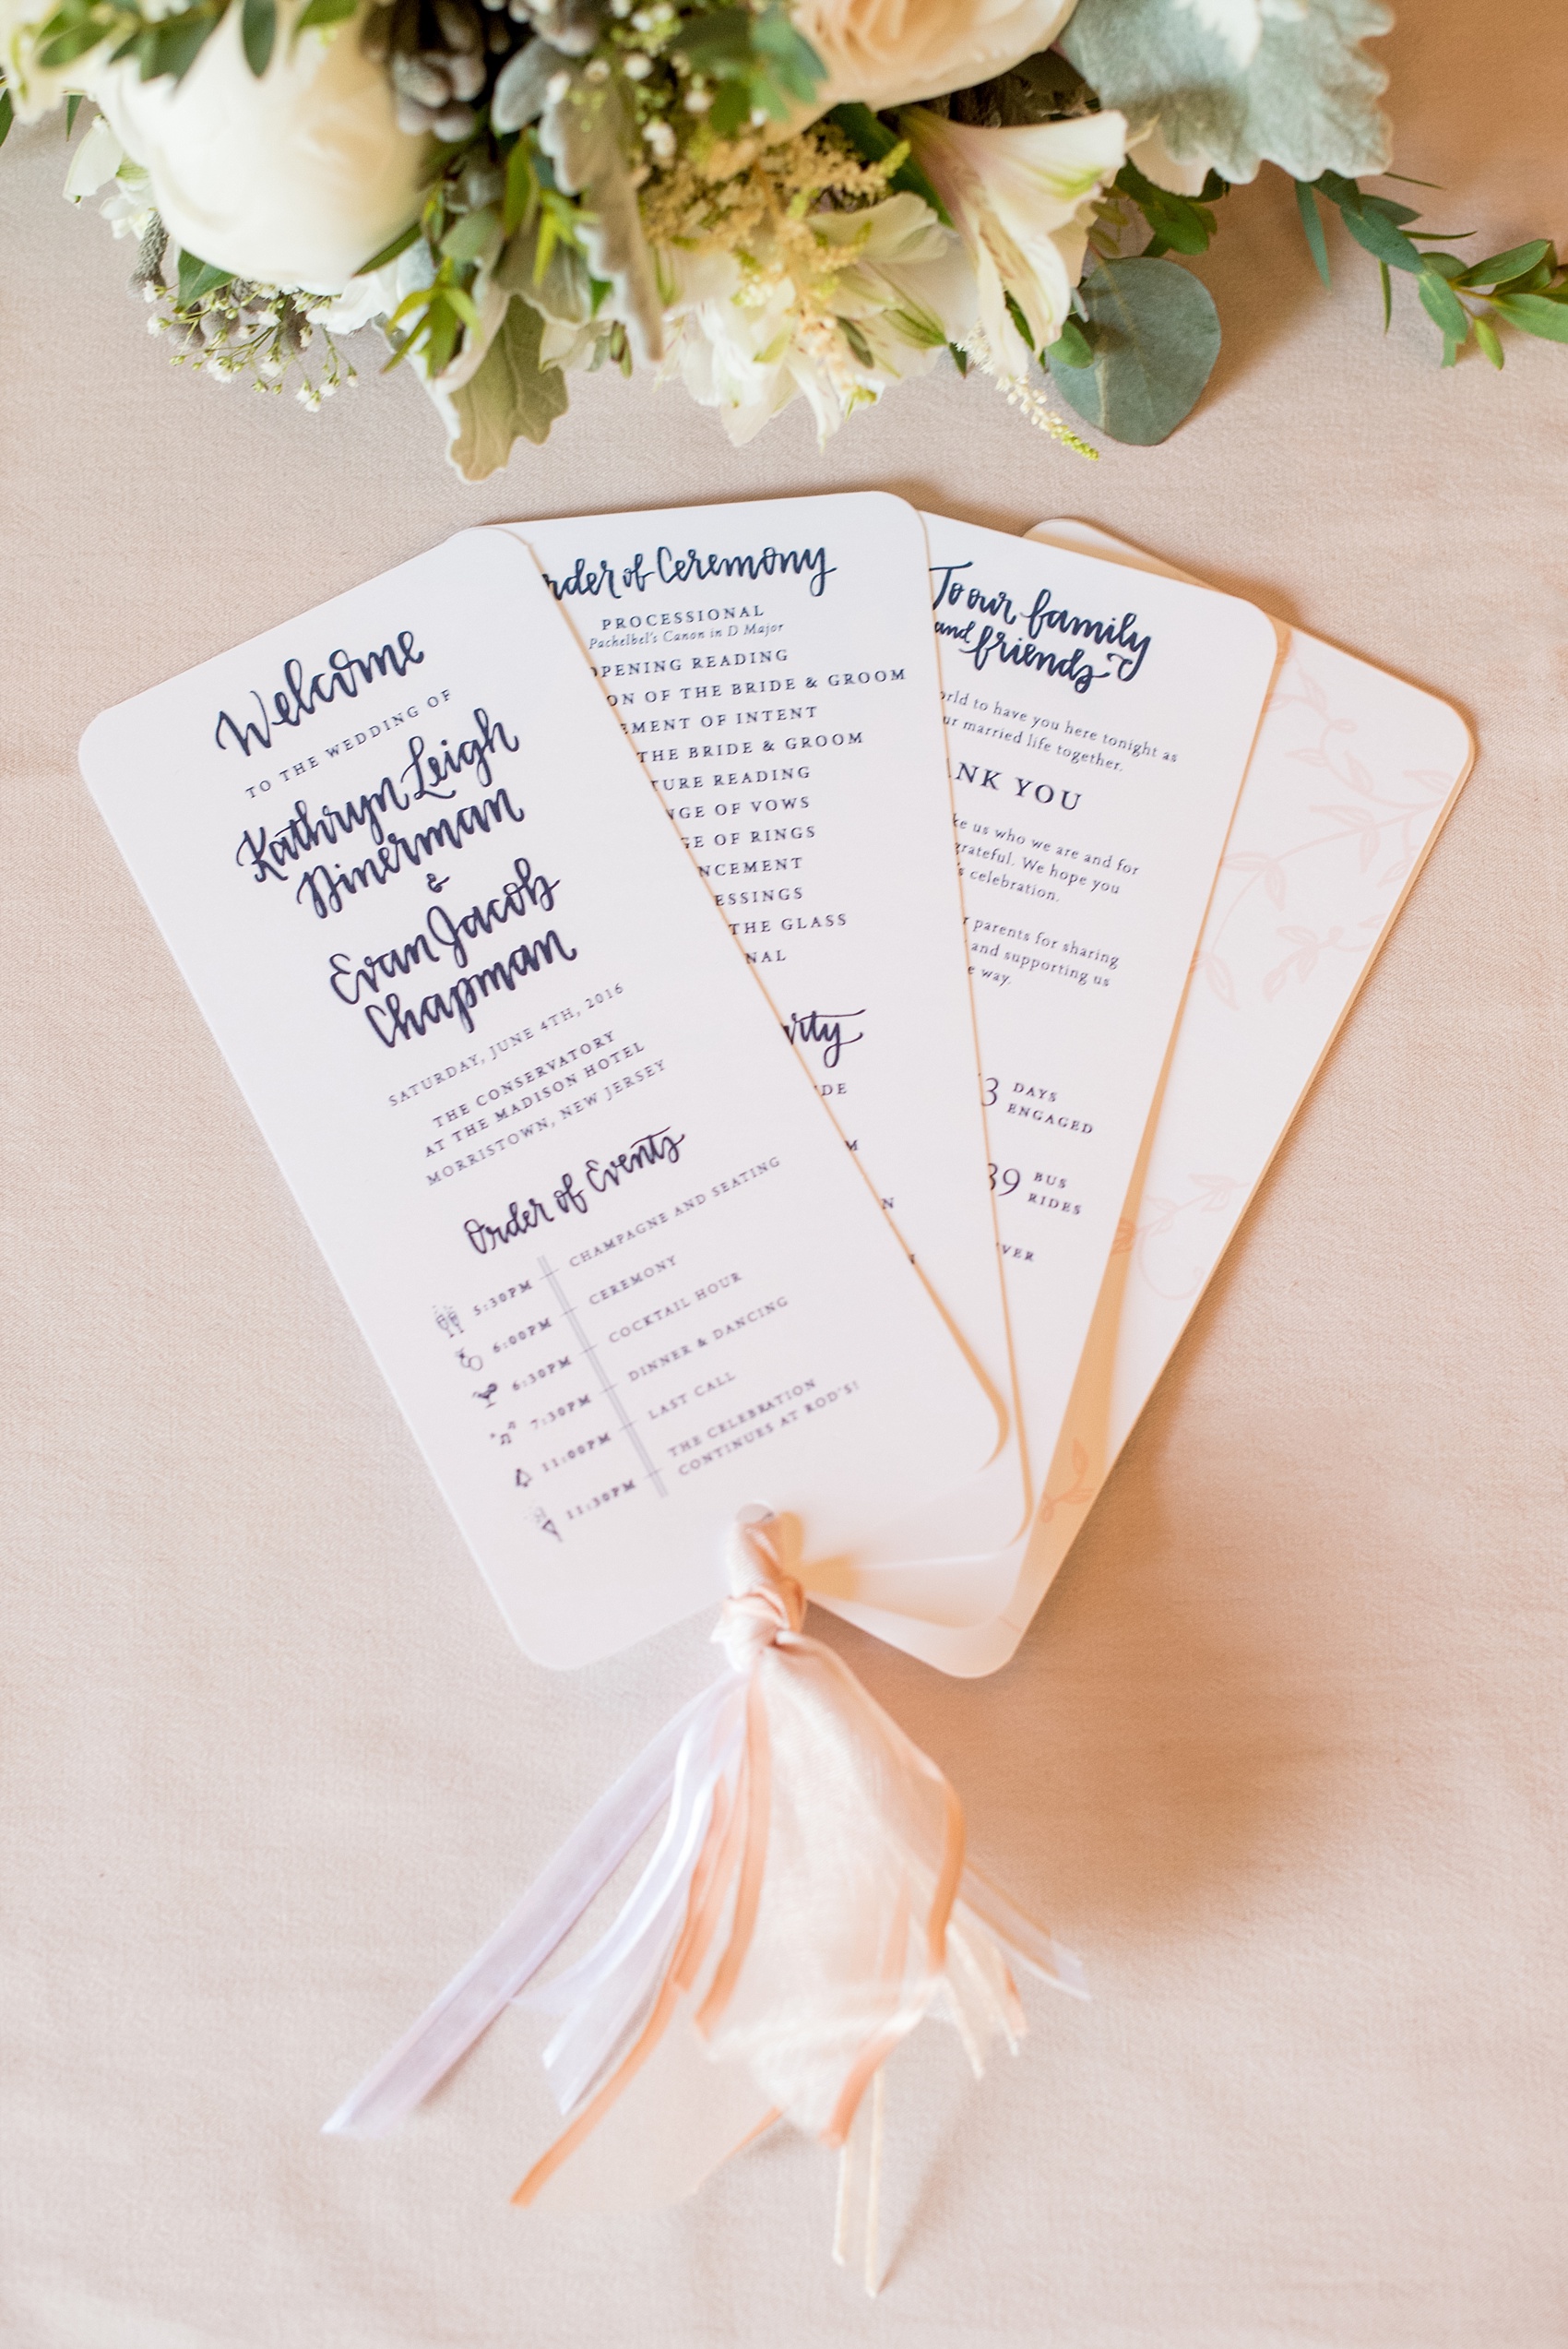 Mikkel Paige Photography photo of a wedding at the Madison Hotel in NJ. Image of the bride and groom's white and blue fan programs.